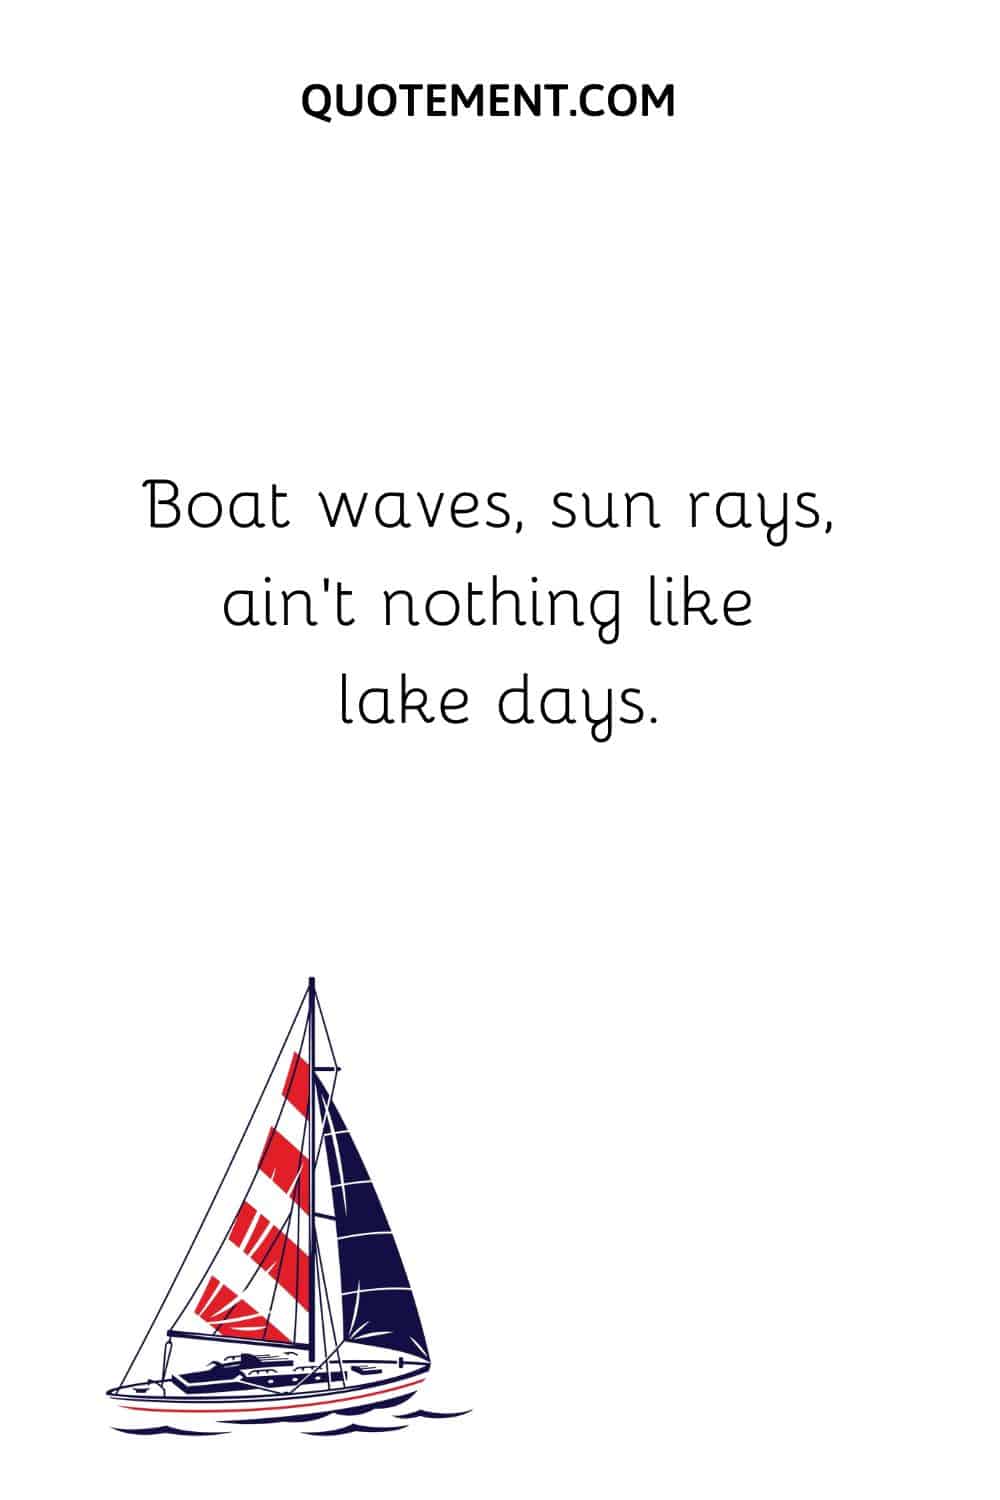  Boat waves, sun rays, ain’t nothing like lake days